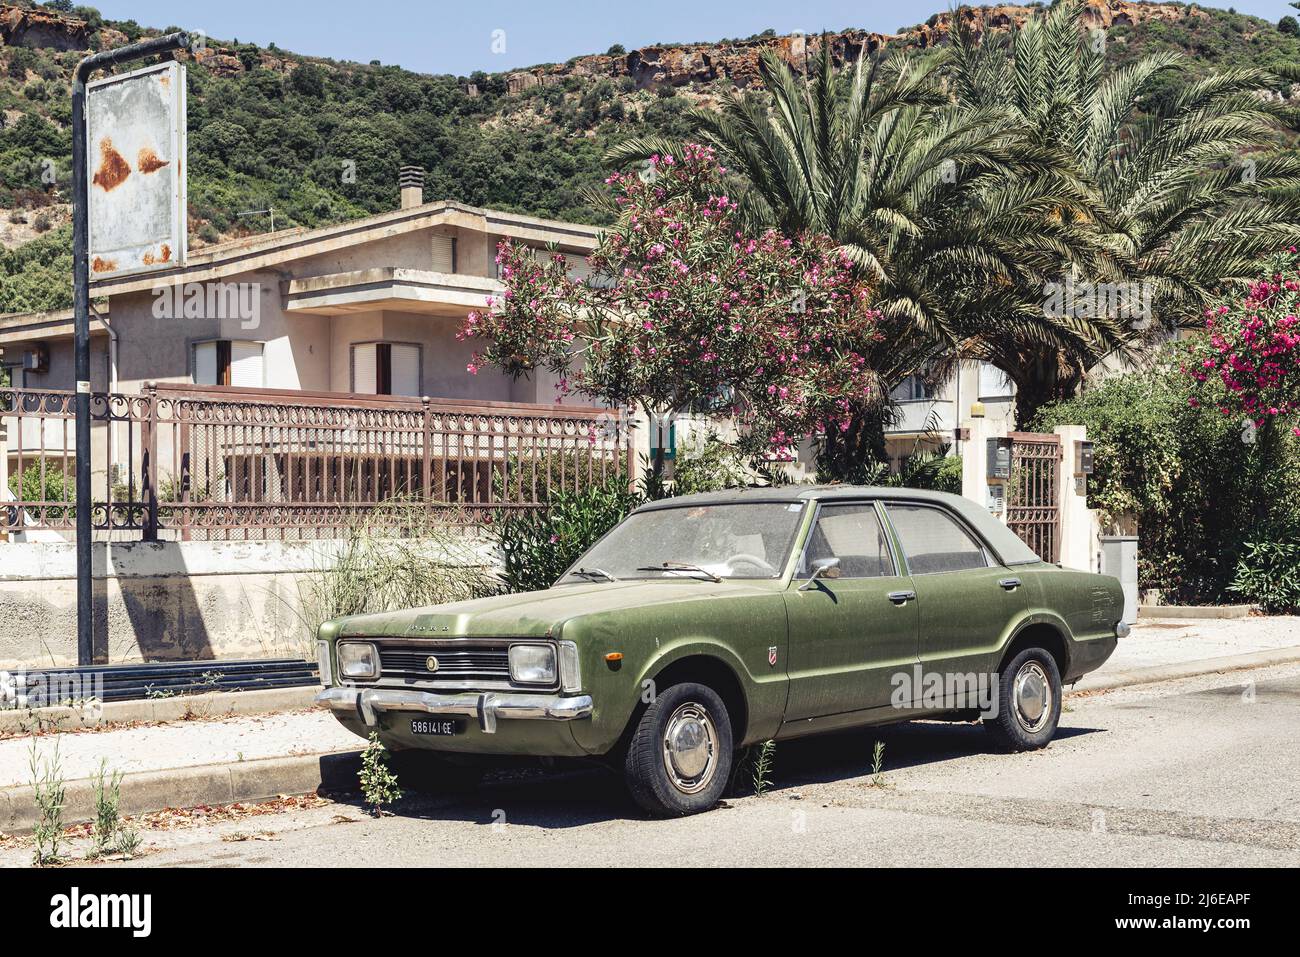 Classic Car and Retro Design - old, dusty, weathered and rusty Ford Taunus parked on the side of the road in the bright midday sun, Bosa, Sardinia Stock Photo